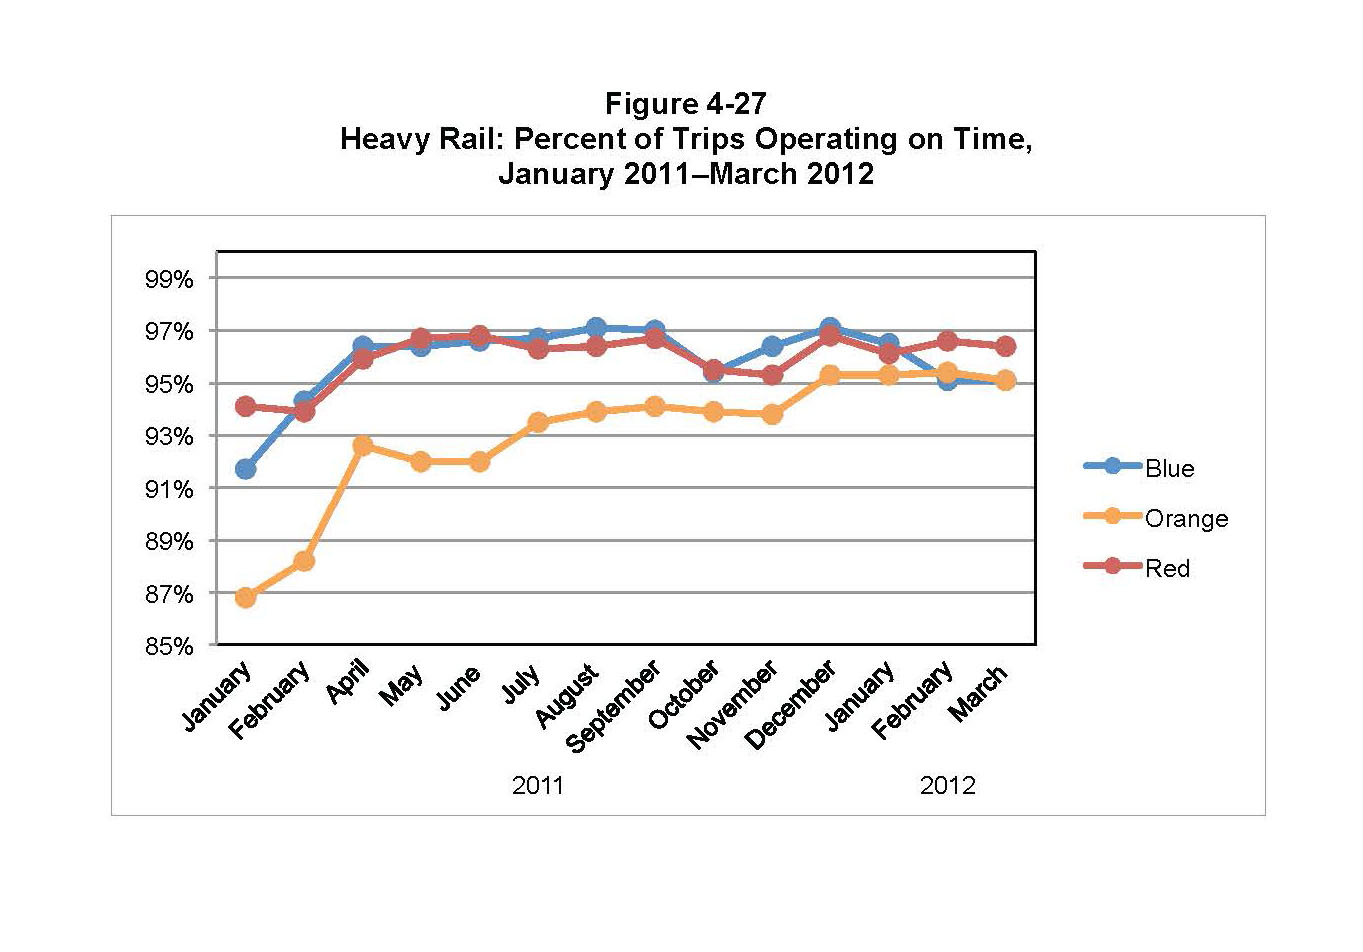 This graph shows the percentage of trips that operate on time for the Red, Blue and Orange Lines. Each rail line is displayed in its respective color. The data are displayed for every month between January 2011 and March 2012.